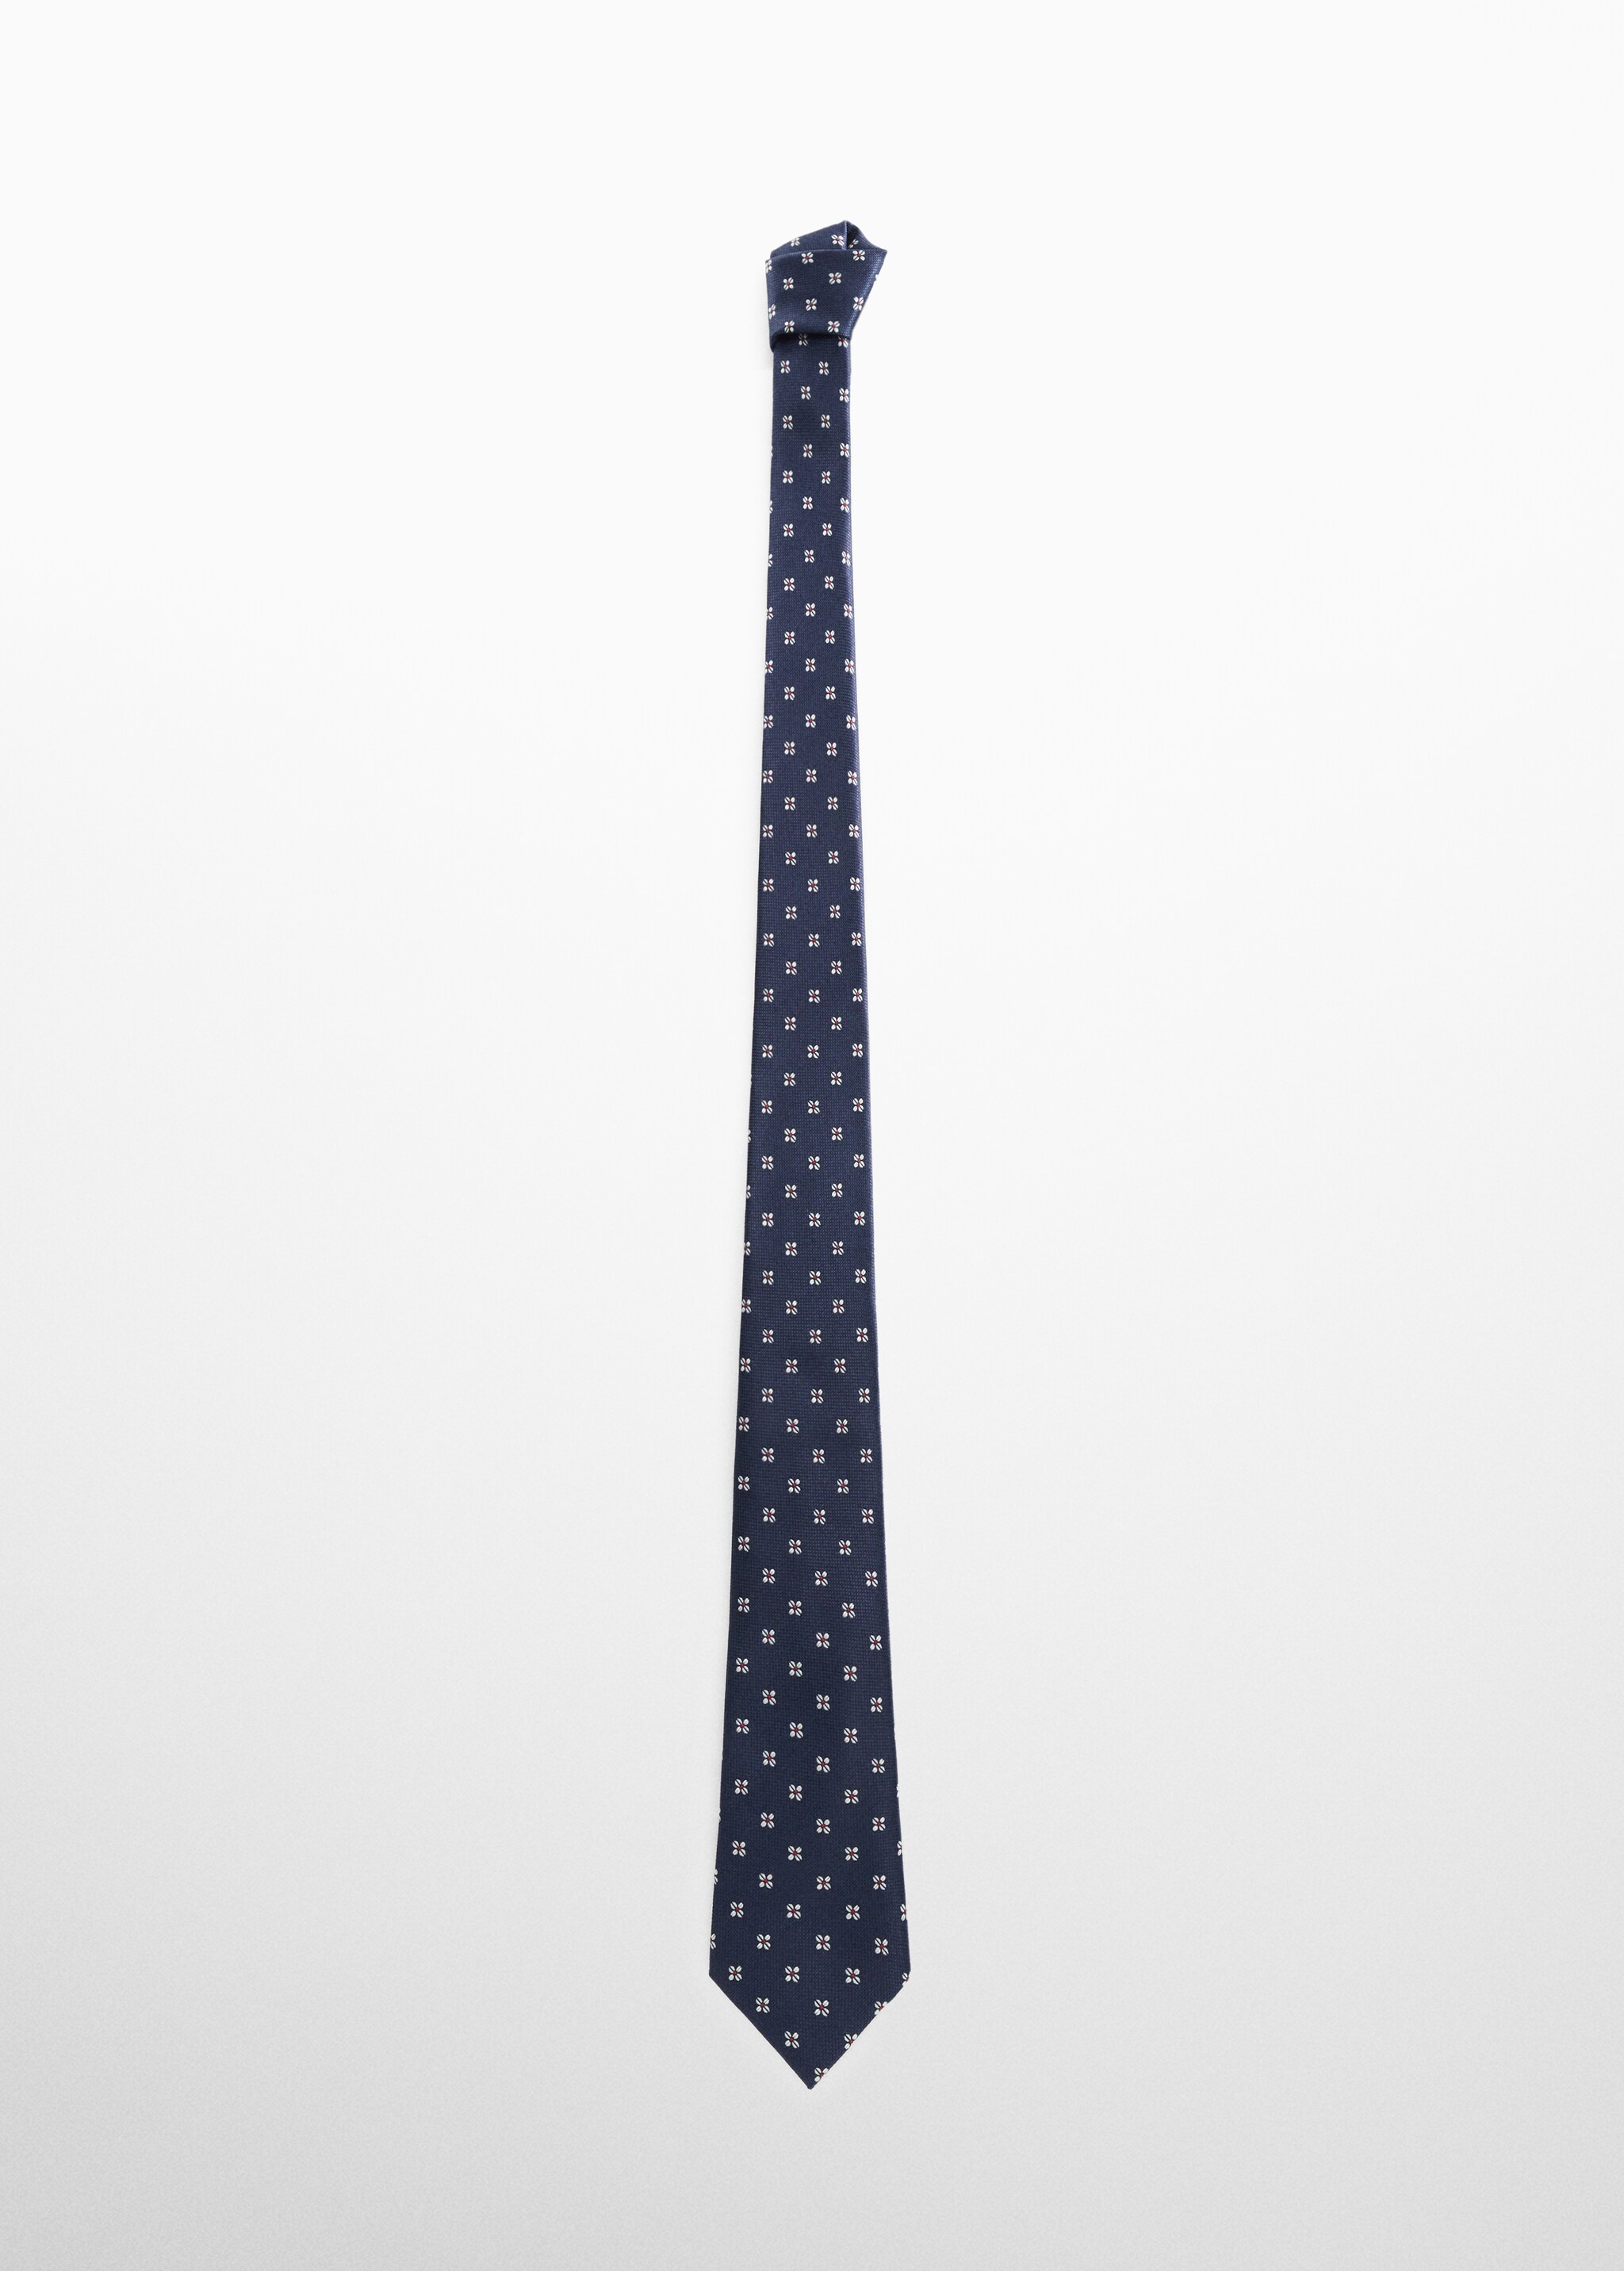 Floral print tie - Article without model